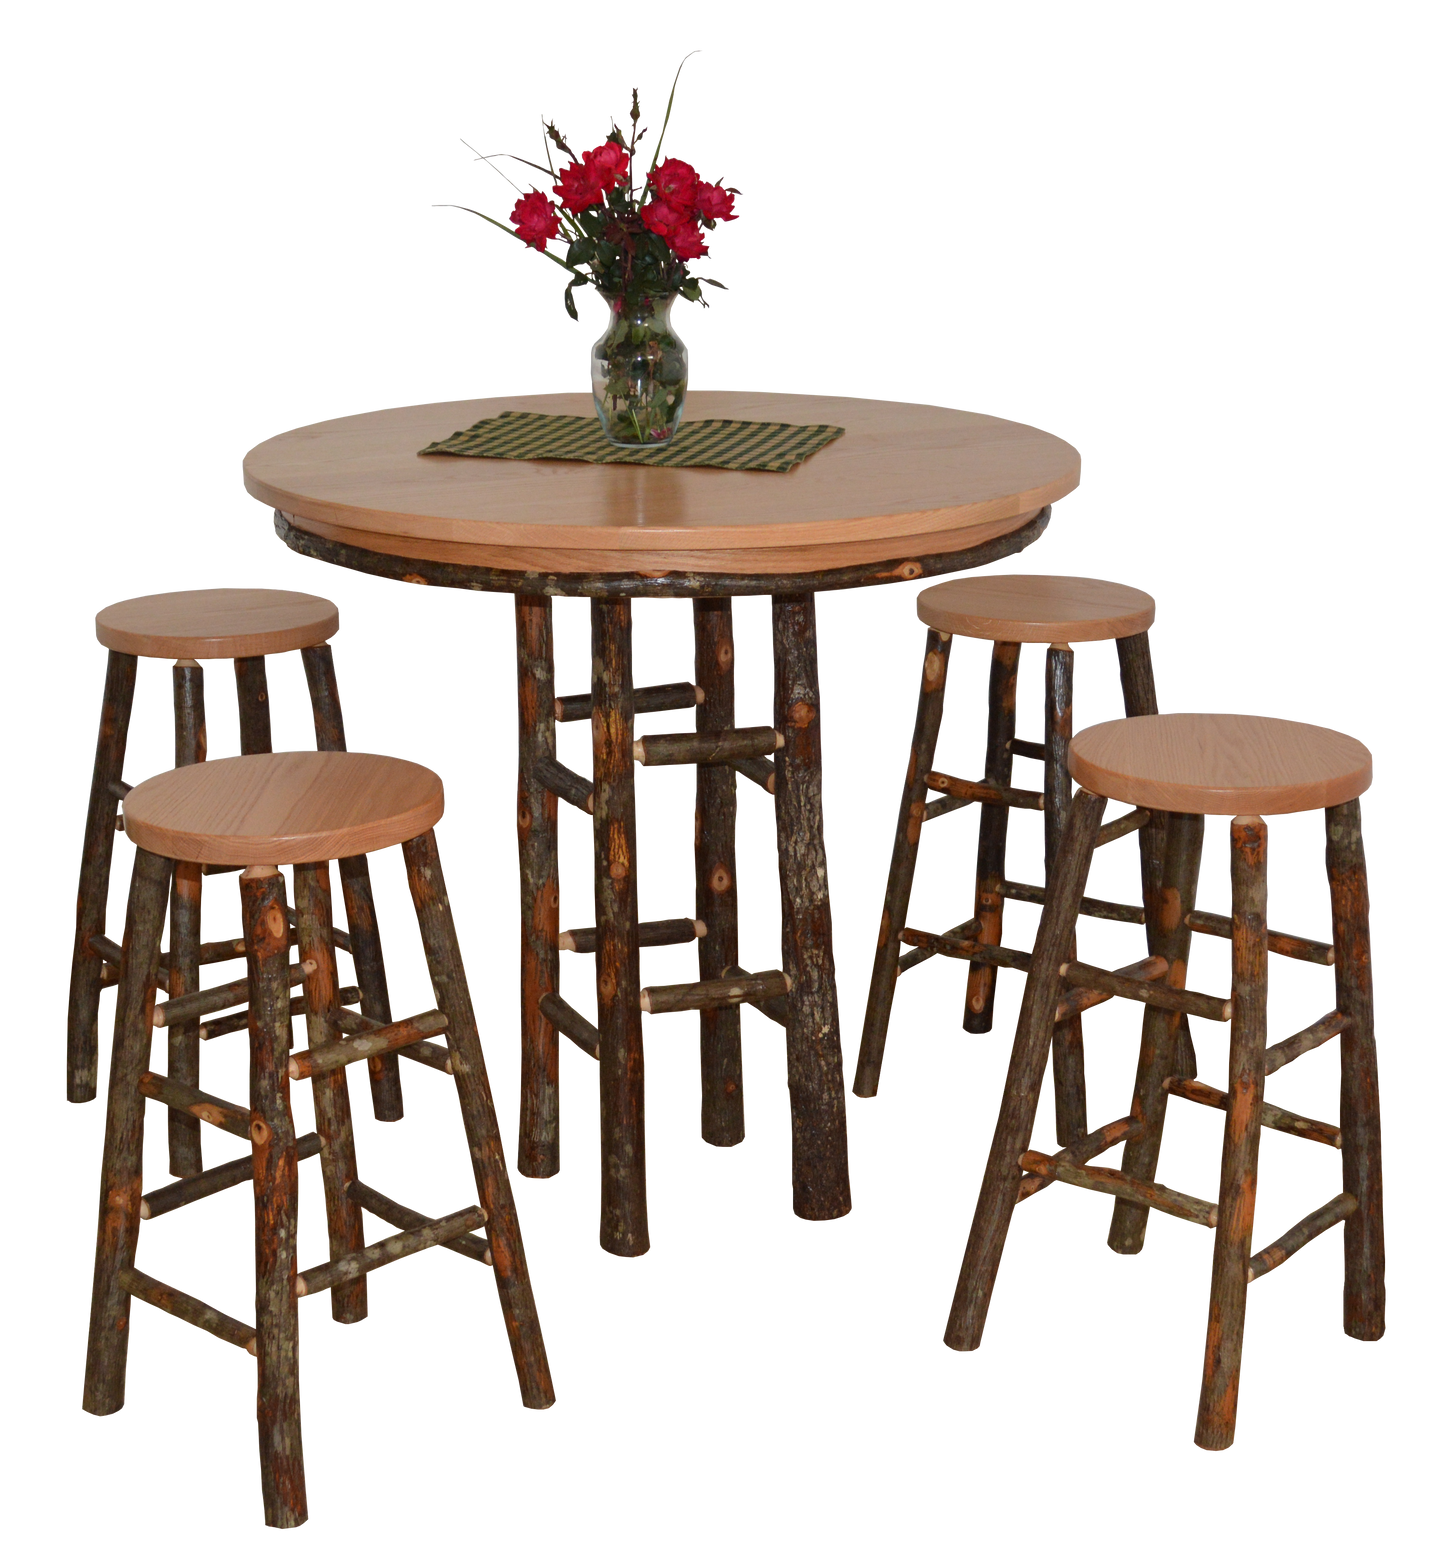 A&L Furniture Co.  Hickory 5 Piece Bar Table Set - LEAD TIME TO SHIP 4 WEEKS OR LESS